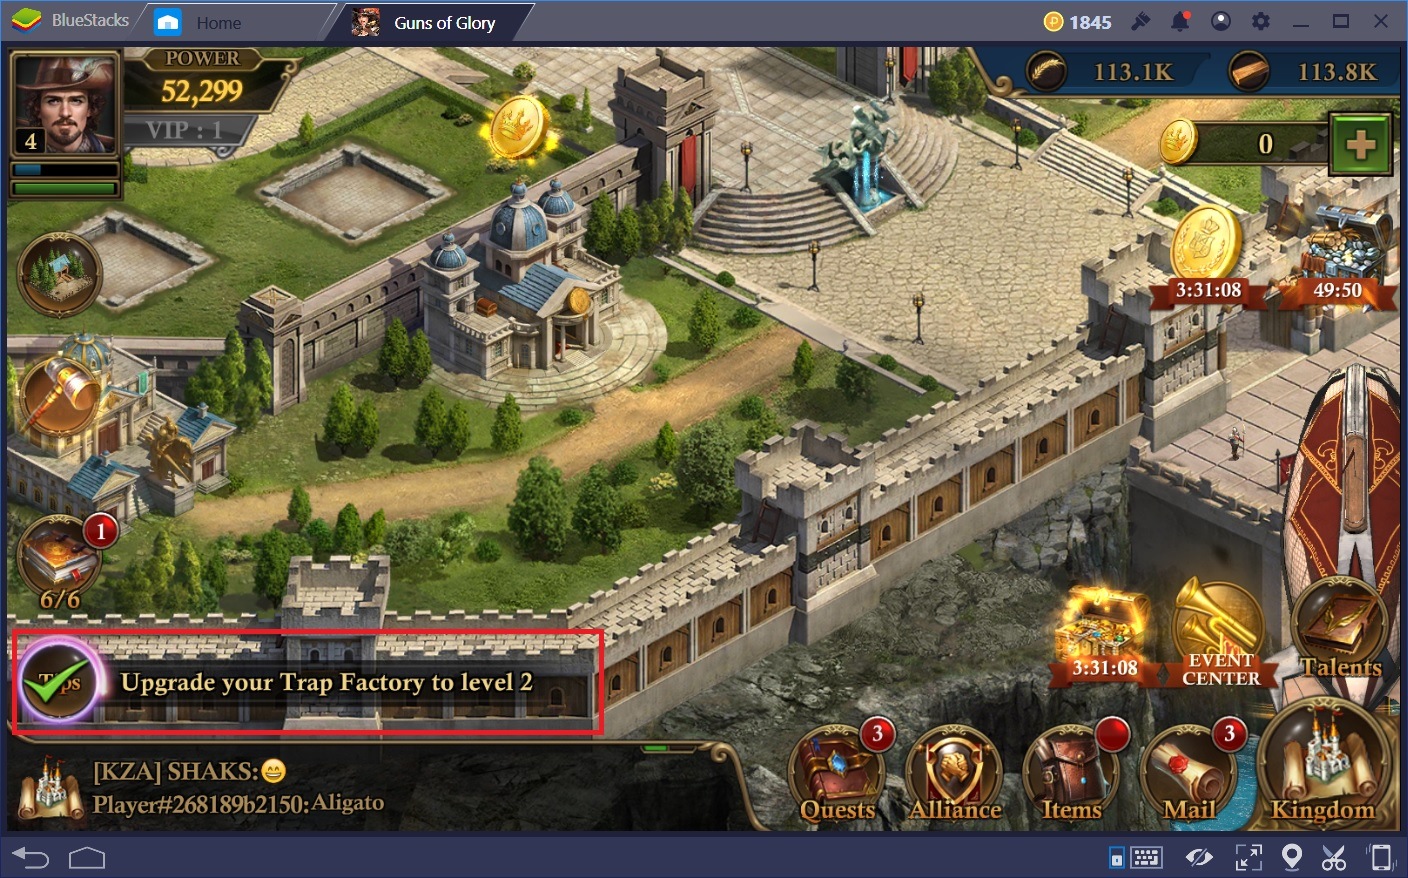 Tips and Tricks to Improve Your Success in Guns of Glory on PC